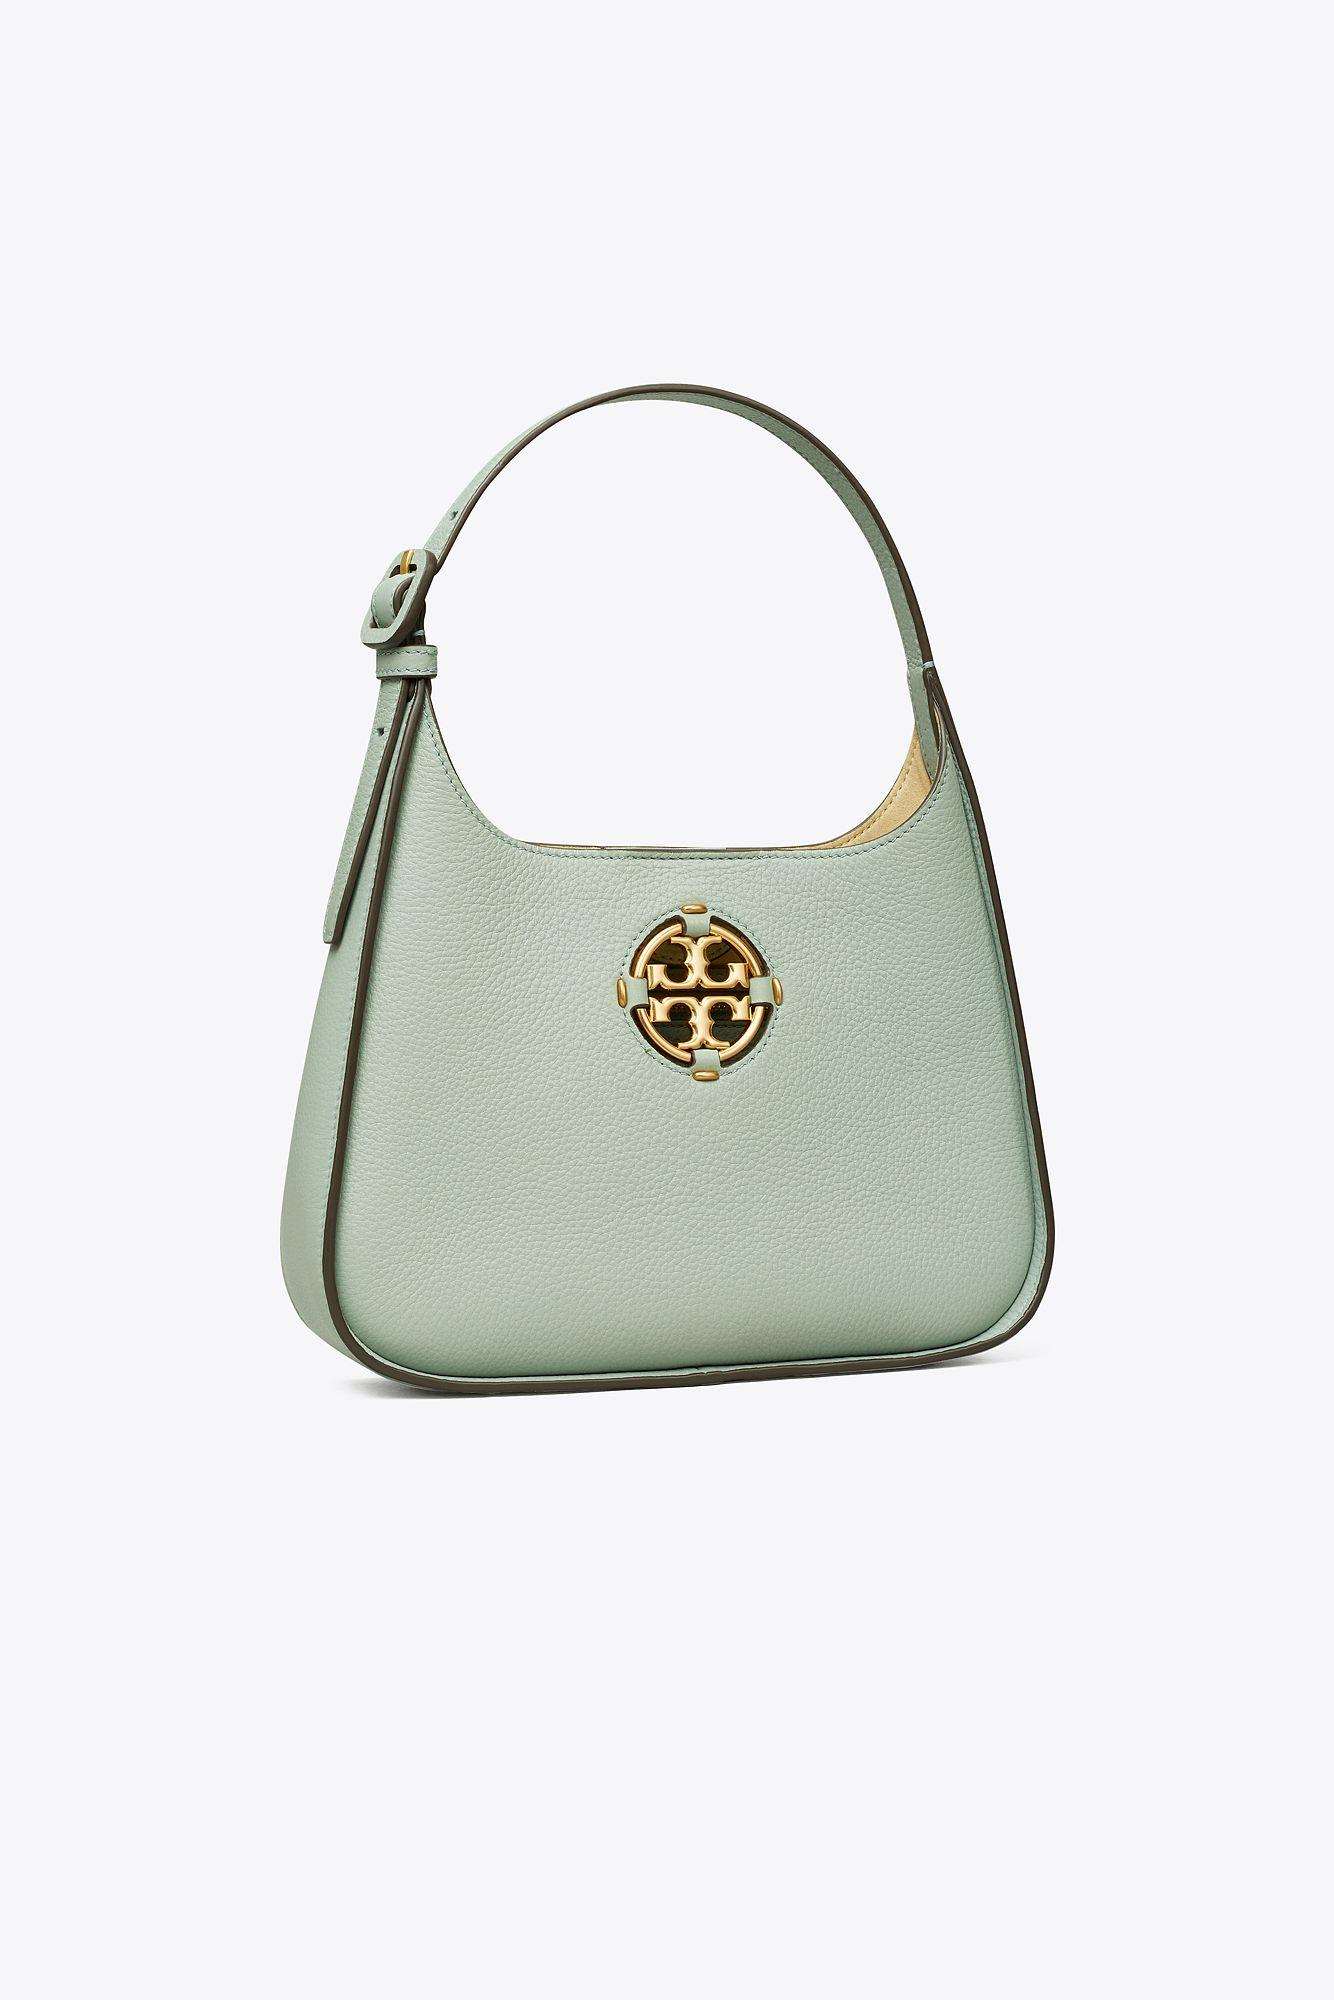 Tory Burch Miller Small Classic Shoulder Bag in Green | Lyst